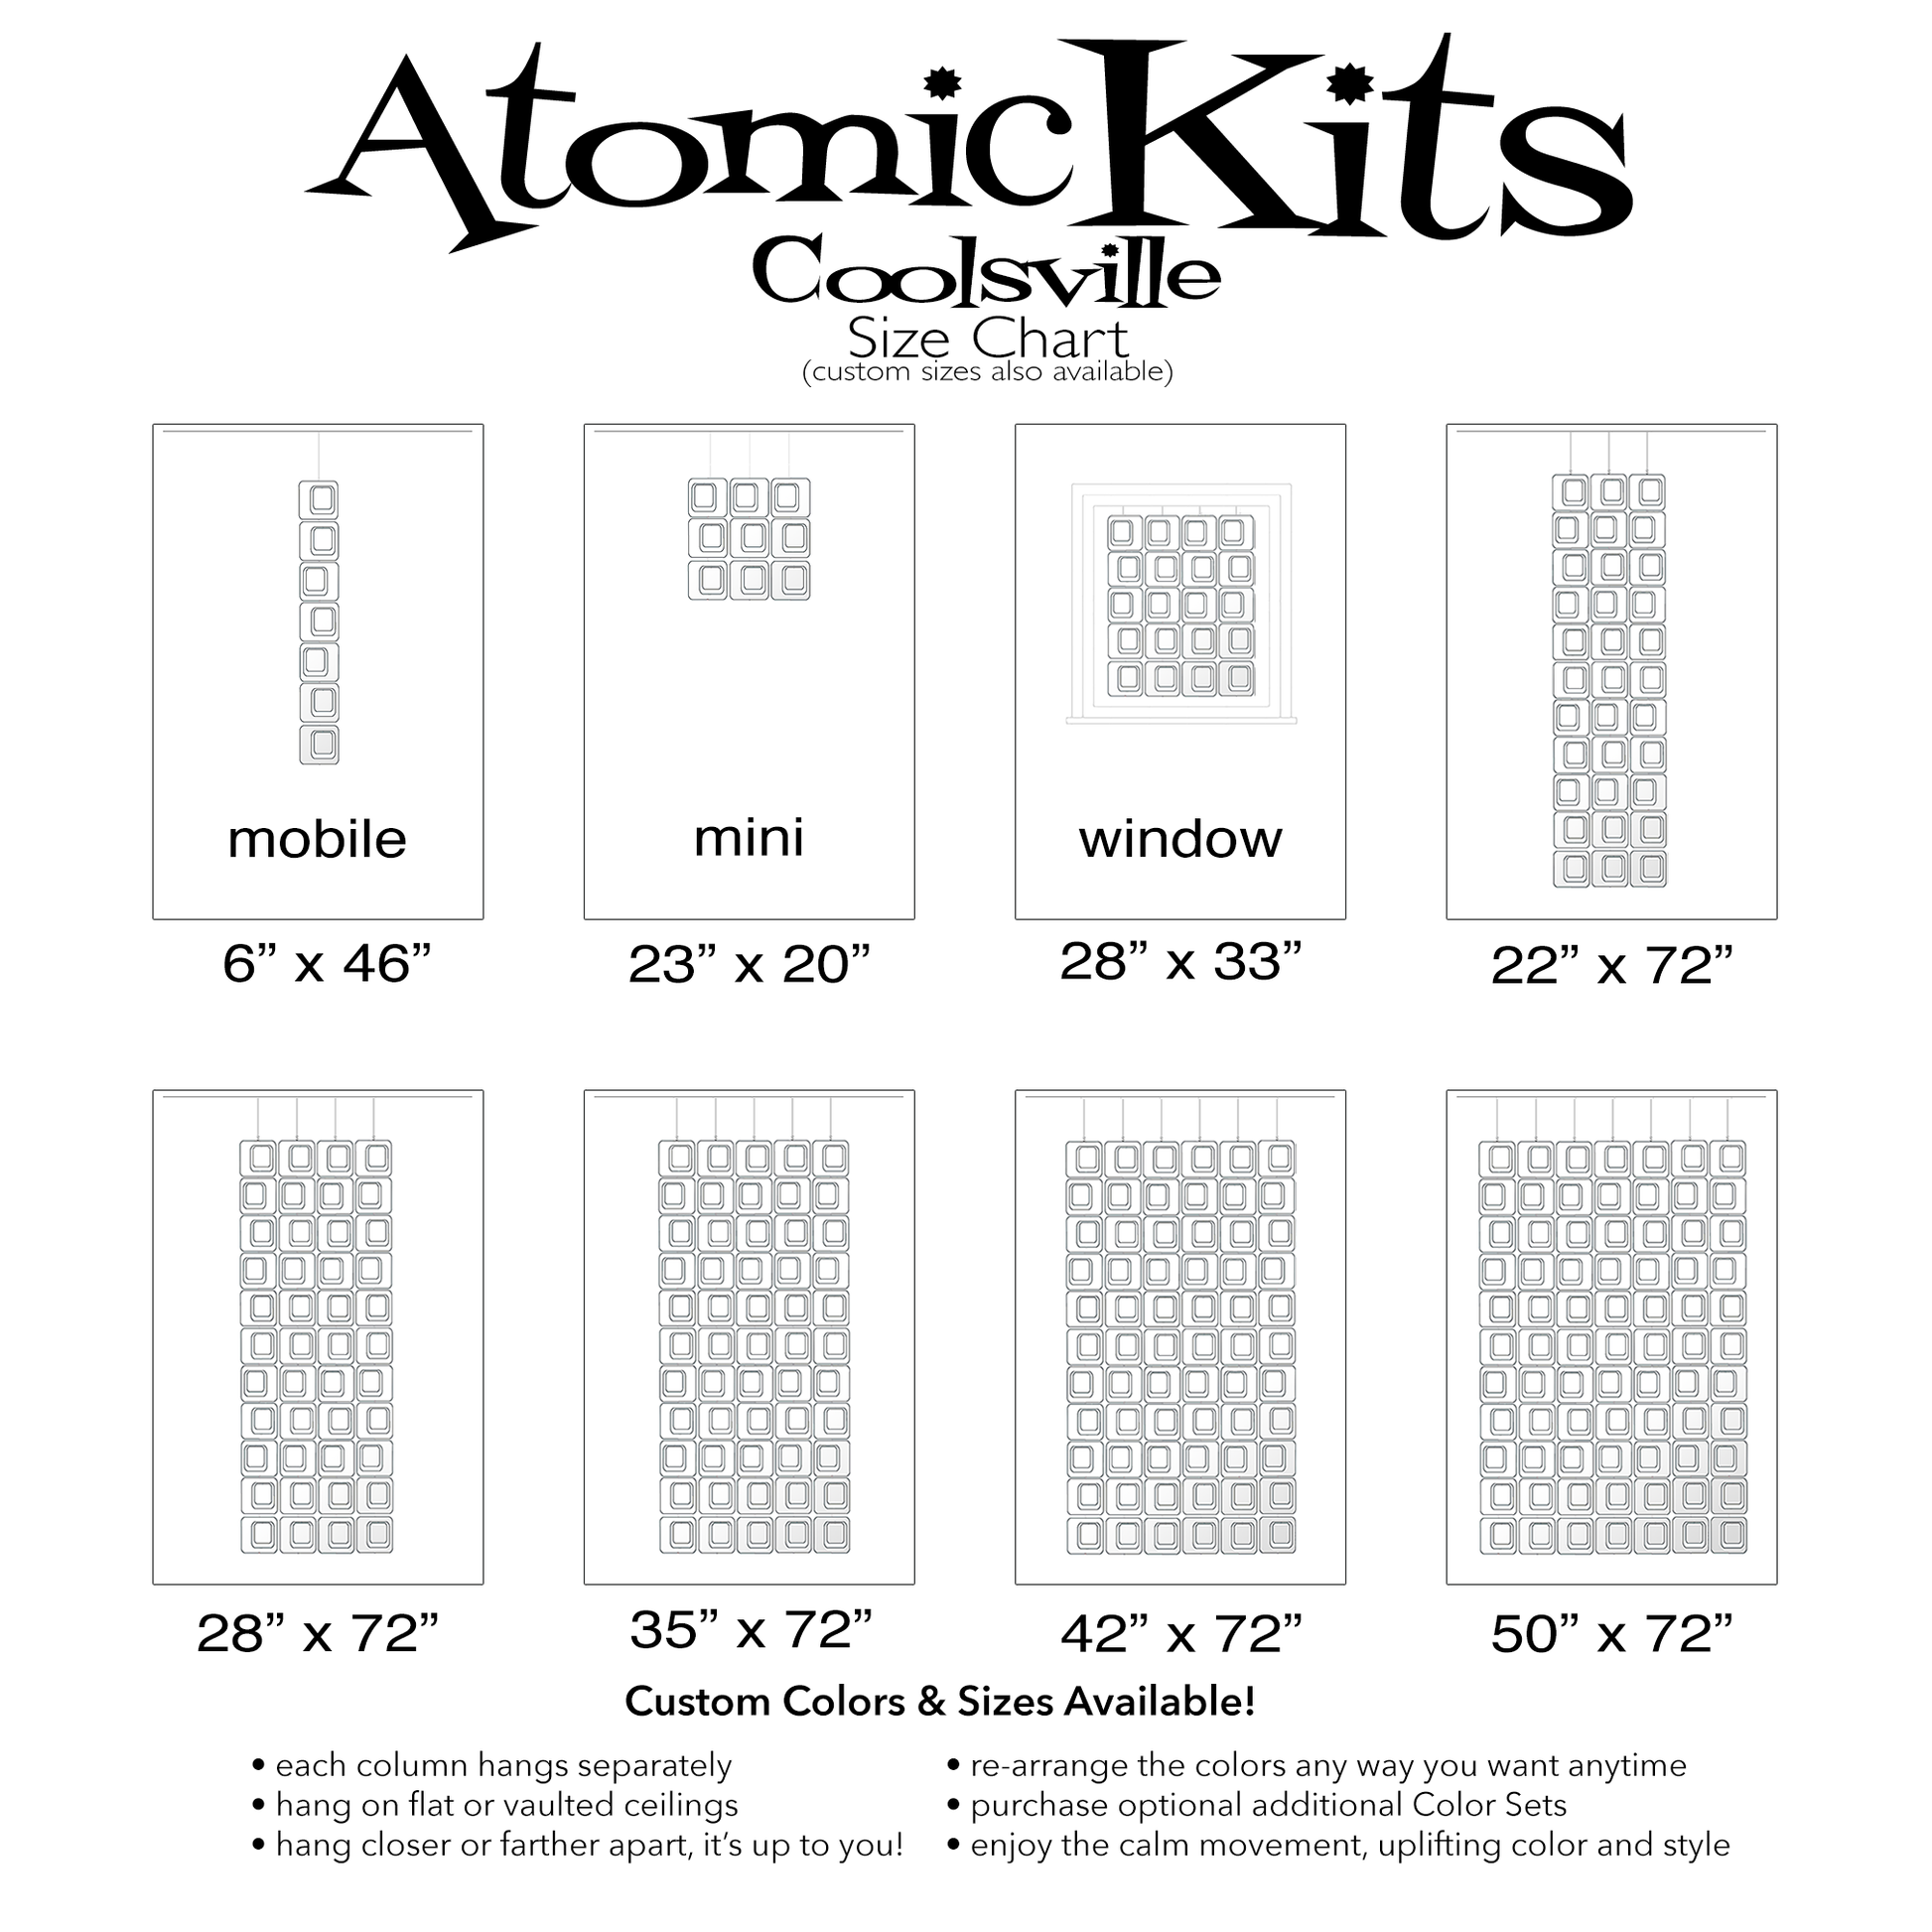 Size Chart for Coolsville in Clear Acrylic Colors for Room Dividers, Curtains, Mobiles, and Wall Art DIY KIT by AtomicMobiles.com